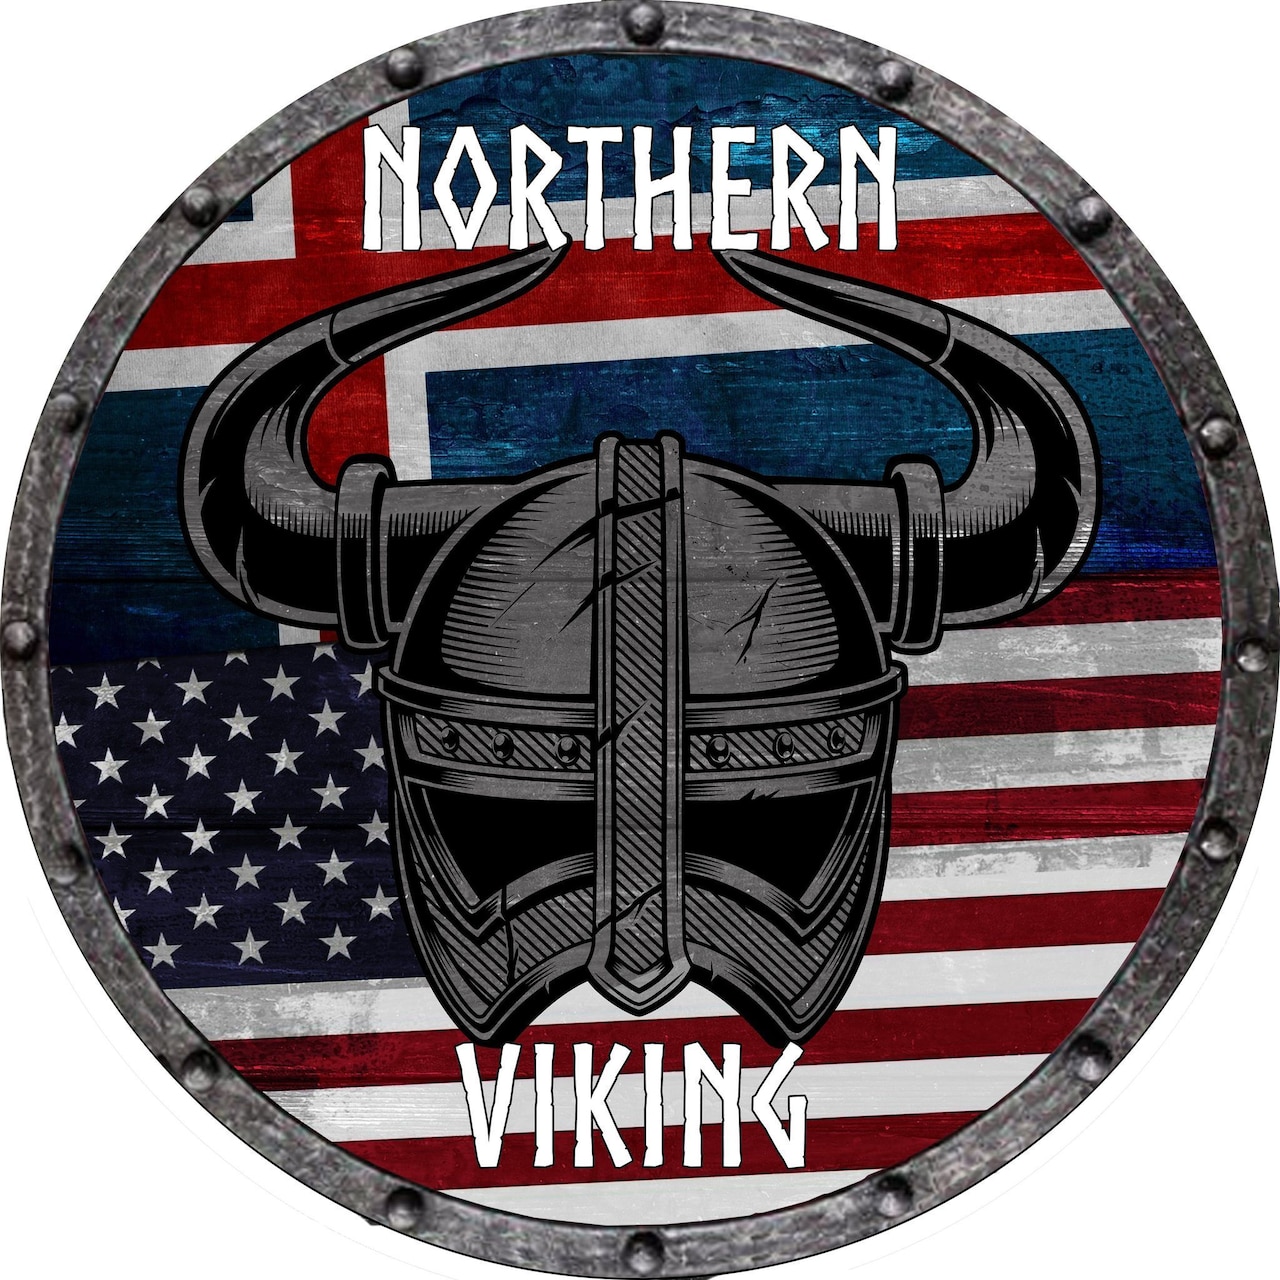 The logo for the U.S. 6th Fleet training exercise Northern Viking 2022.